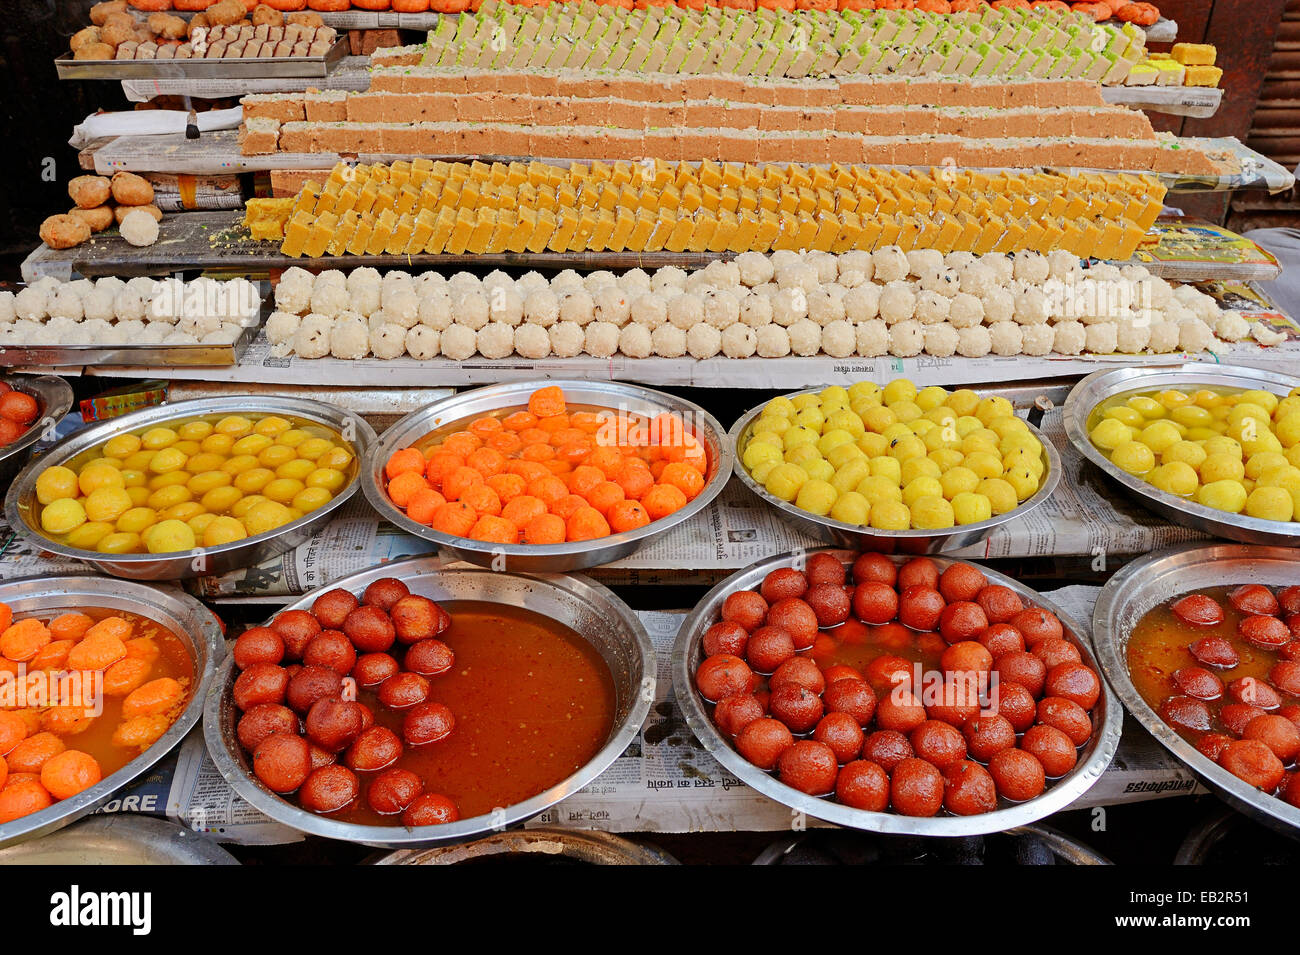 Shop with sweets during the Diwali, Divali or Deepavali Festival of Lights, Bharatpur, Rajasthan, India Stock Photo